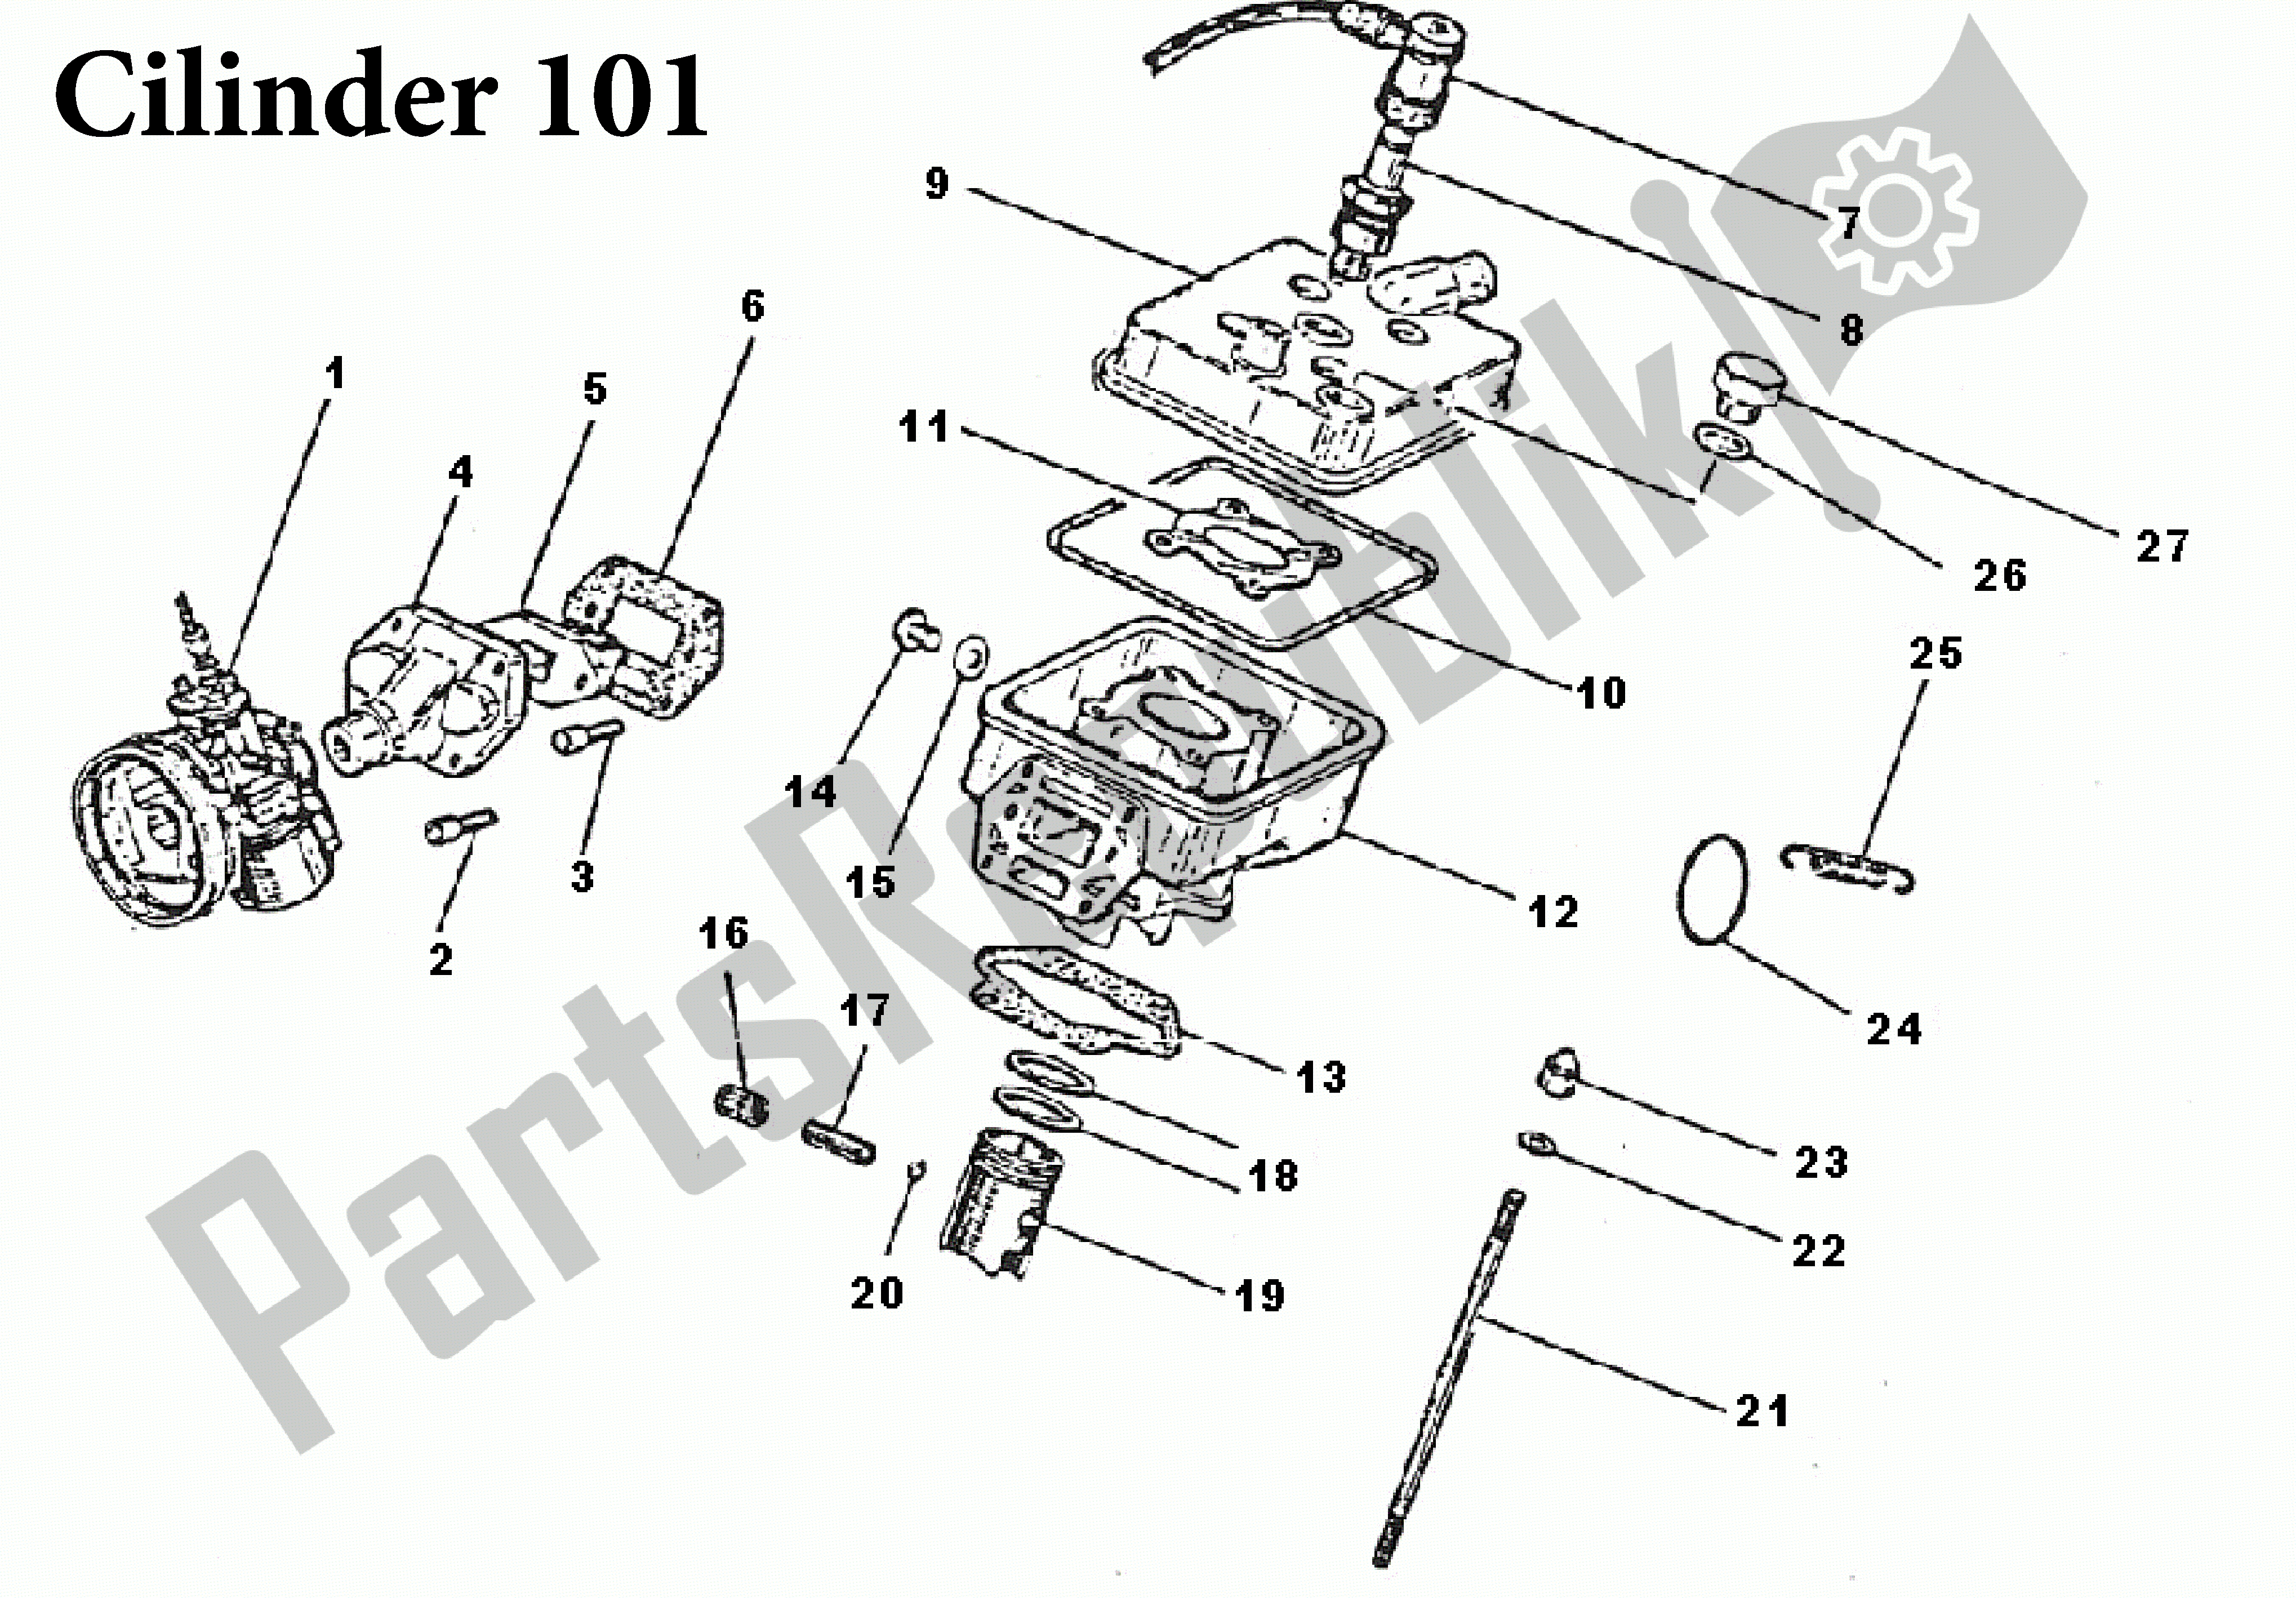 All parts for the Cilinder 101 of the Aprilia RX 50 1989